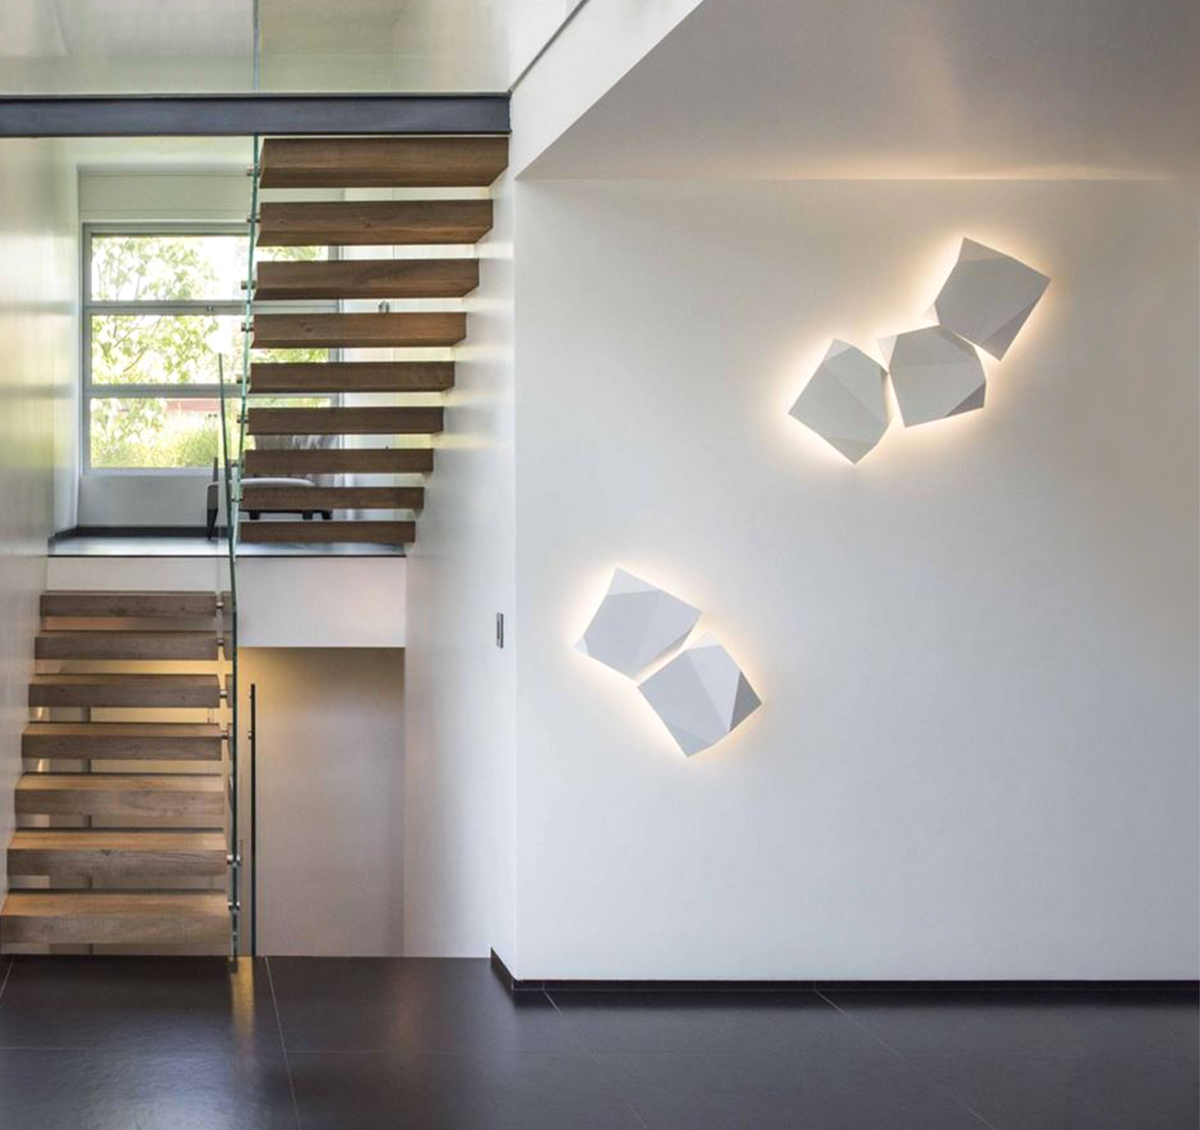 Wall lighting on white wall near wooden staircase with window